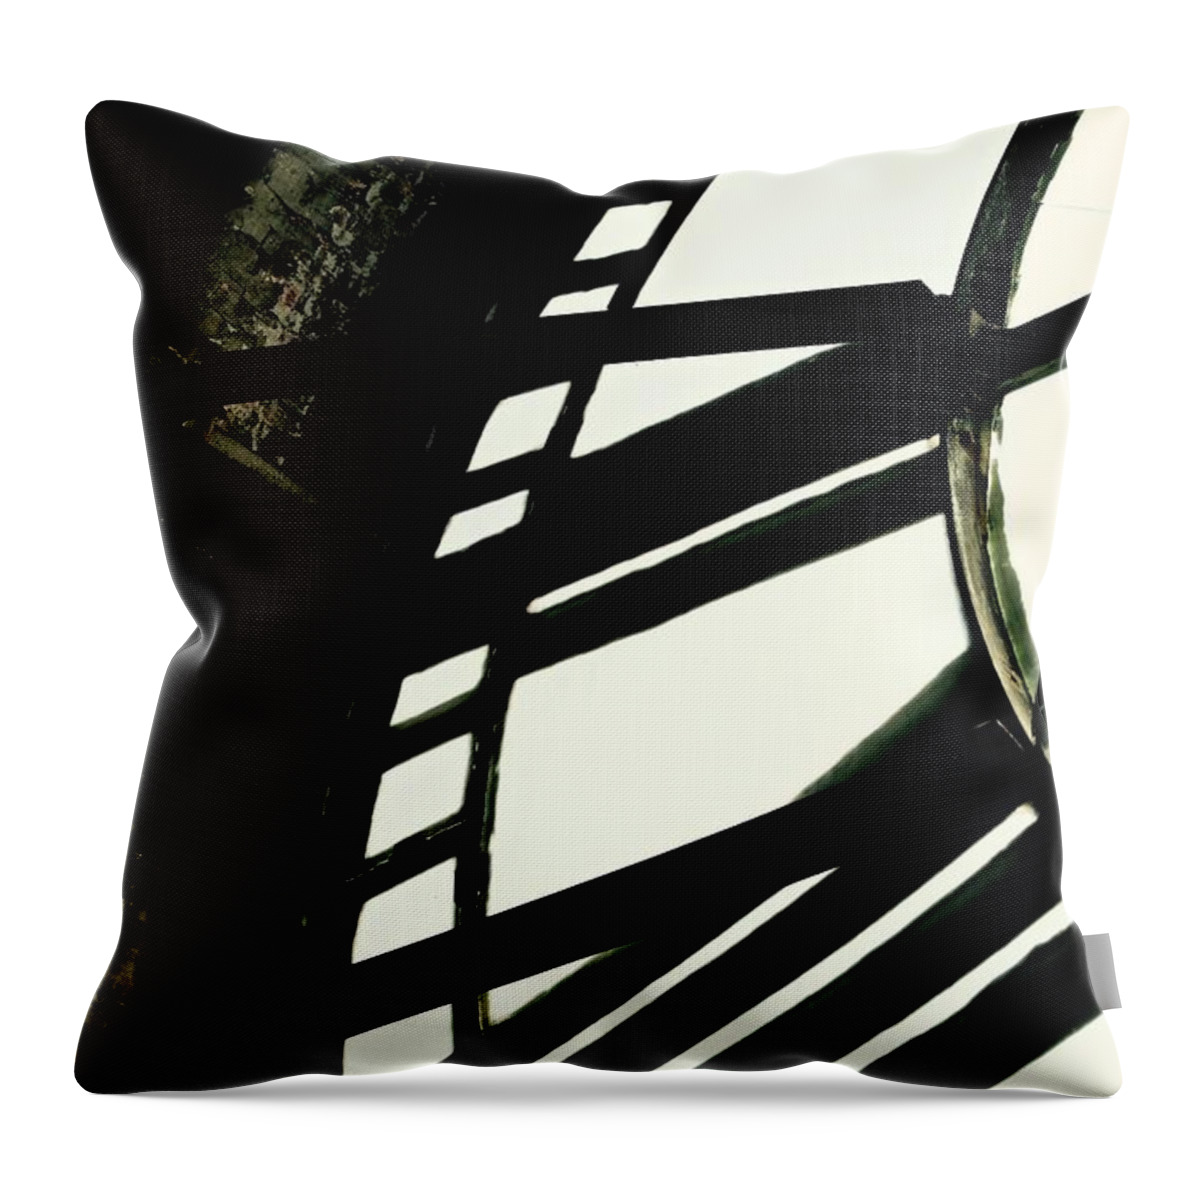 Clock Throw Pillow featuring the photograph Roman Times by Phil Cappiali Jr